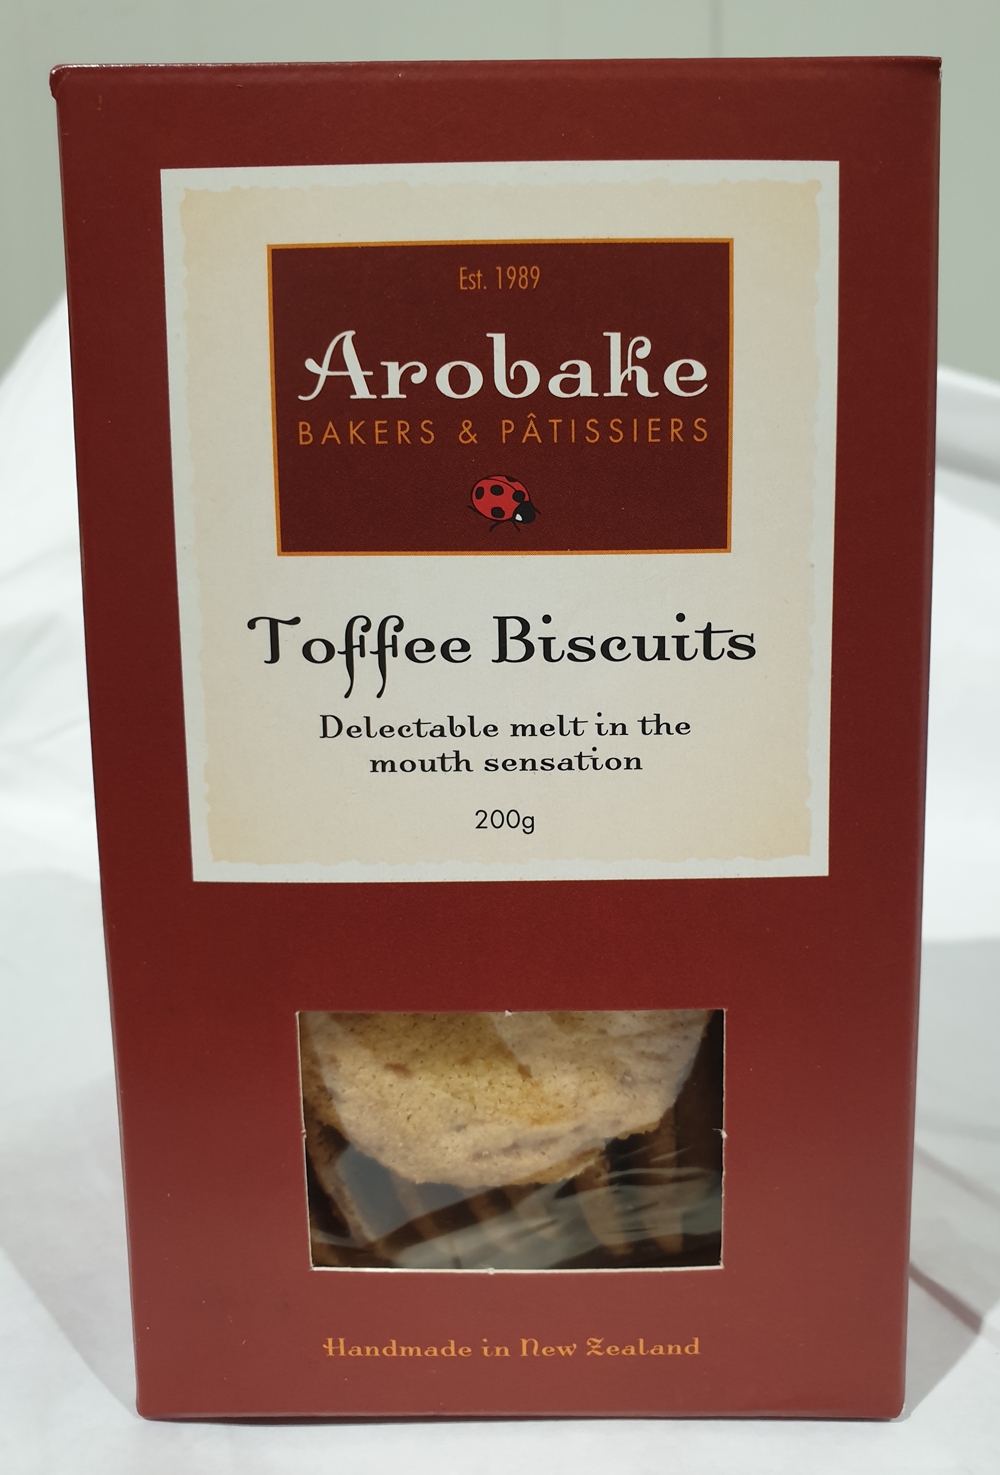 A box of Arobake brand Toffee Biscuits (200g)